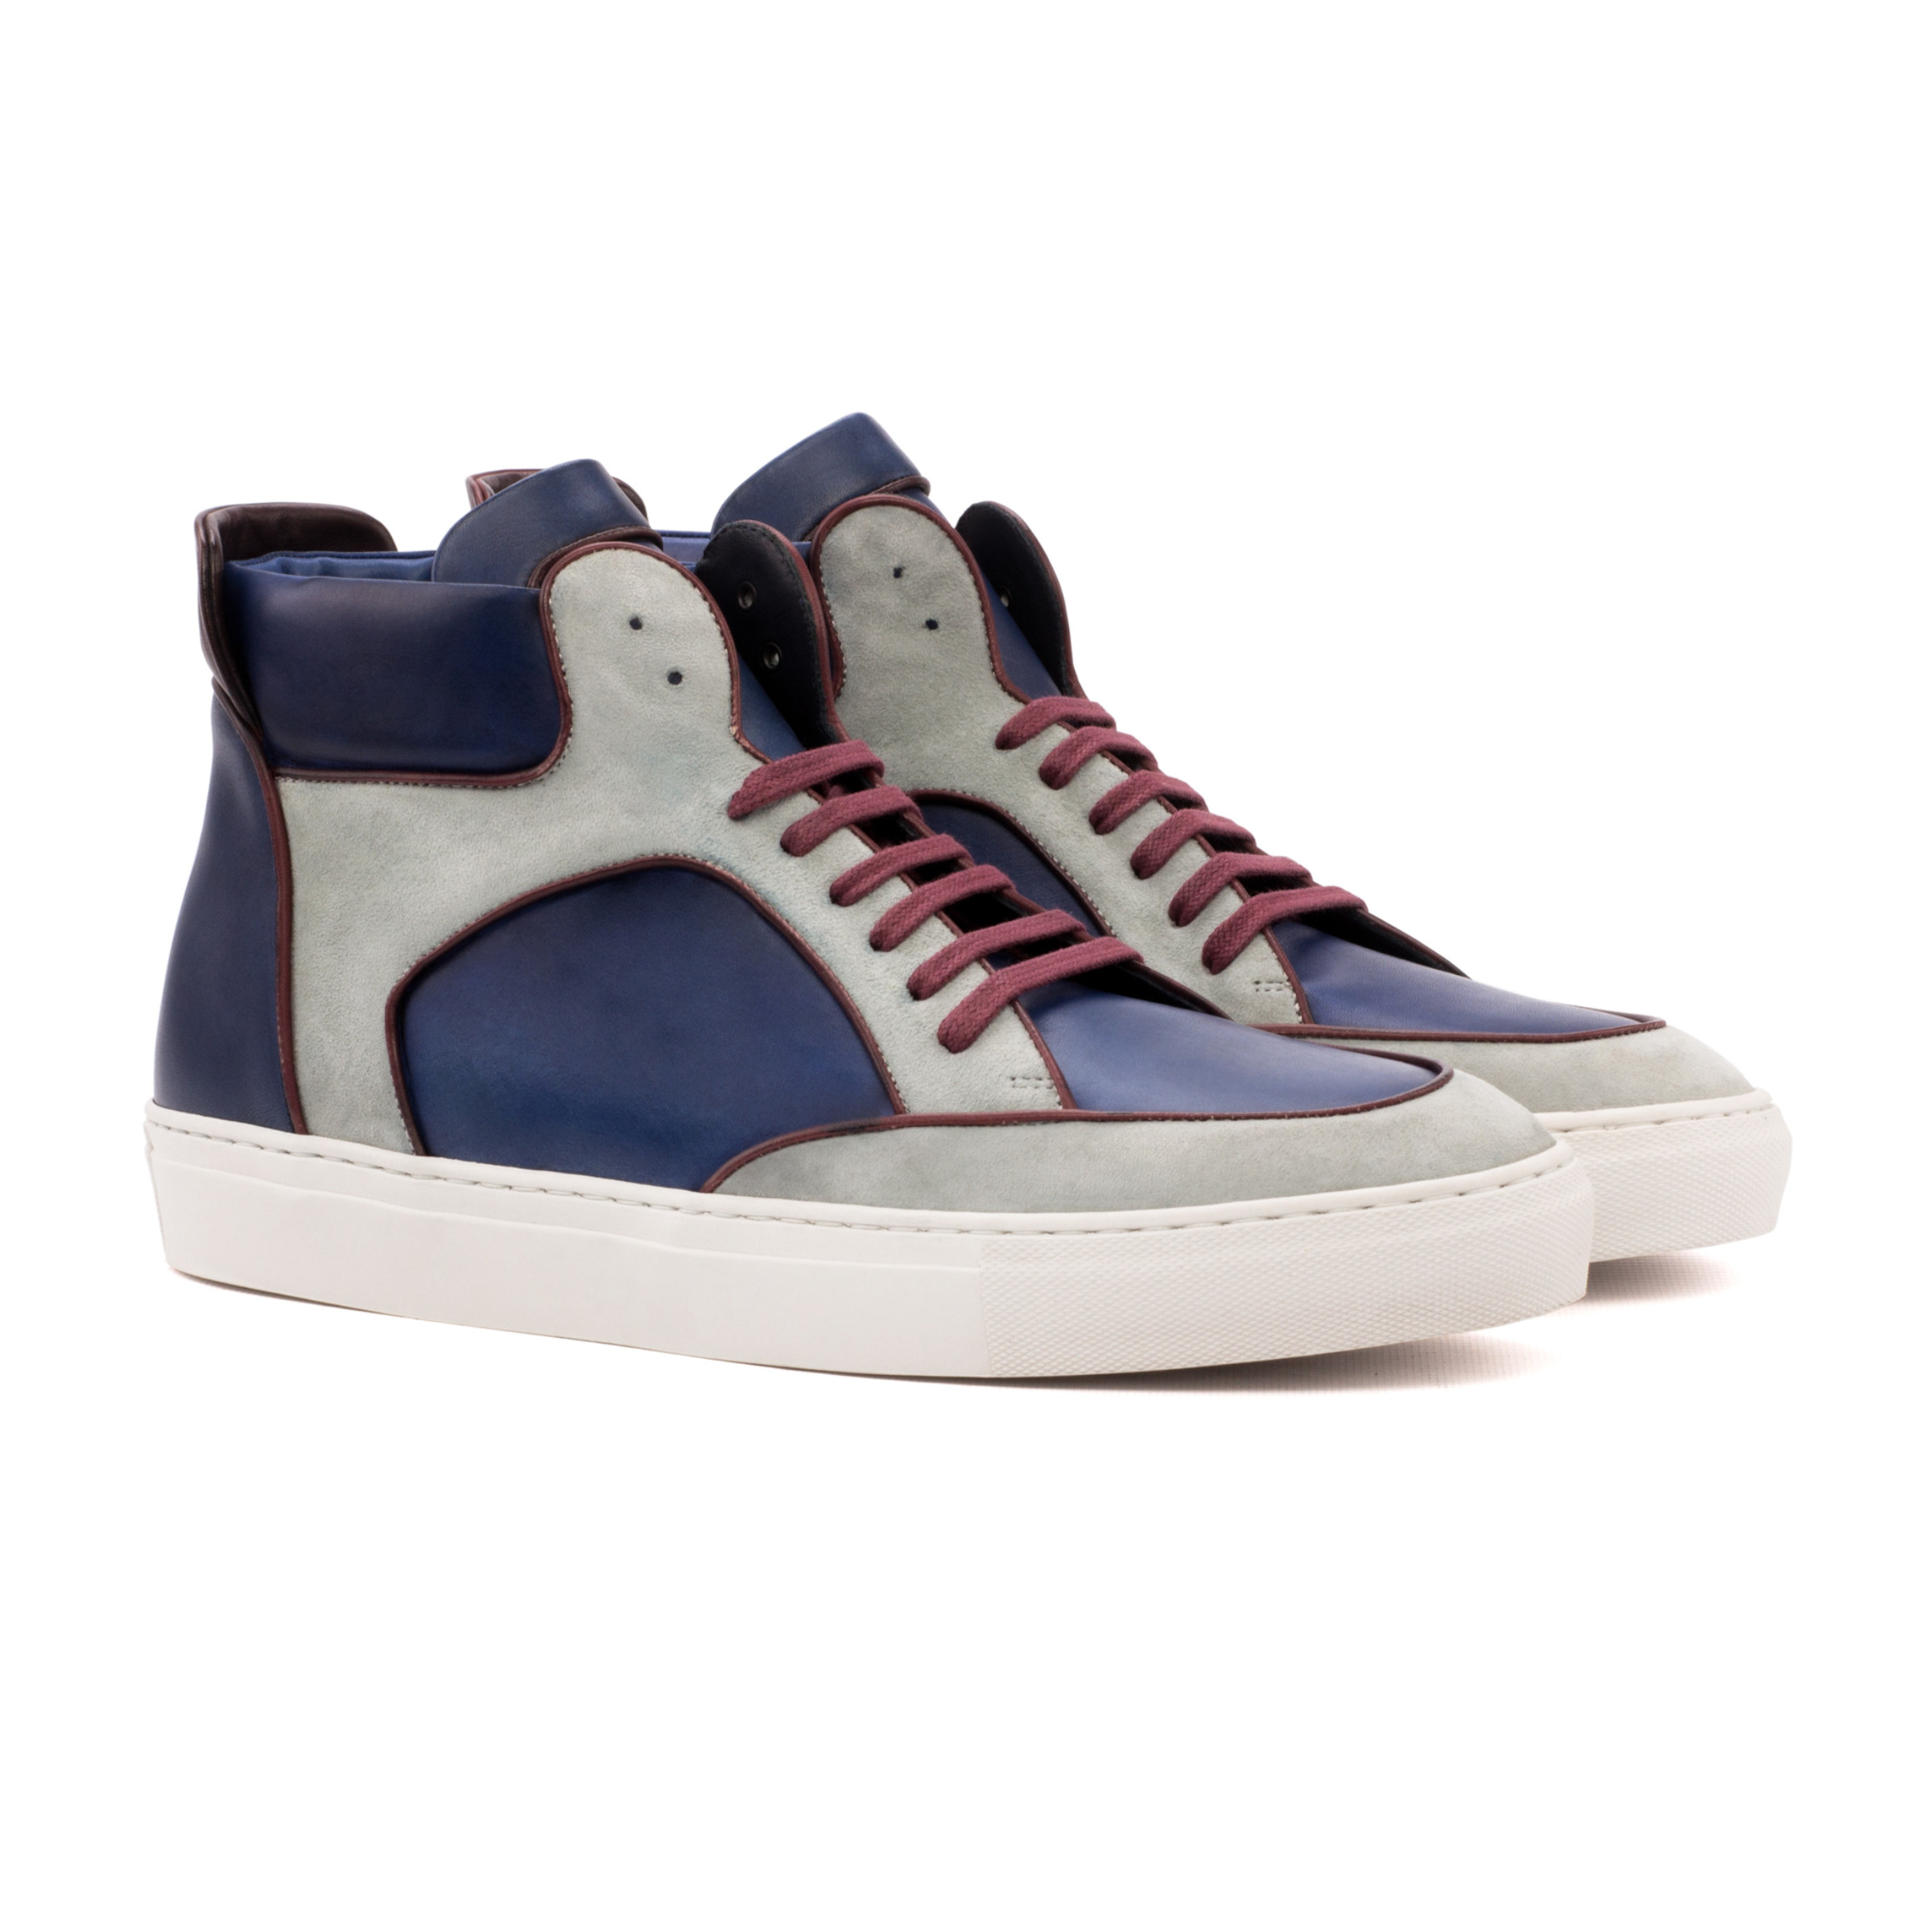 The High Top: Hero Patina. Front side view of burgundy painted calf, navy painted calf, light grey kid suede high top style sneakers with white soles on a white background